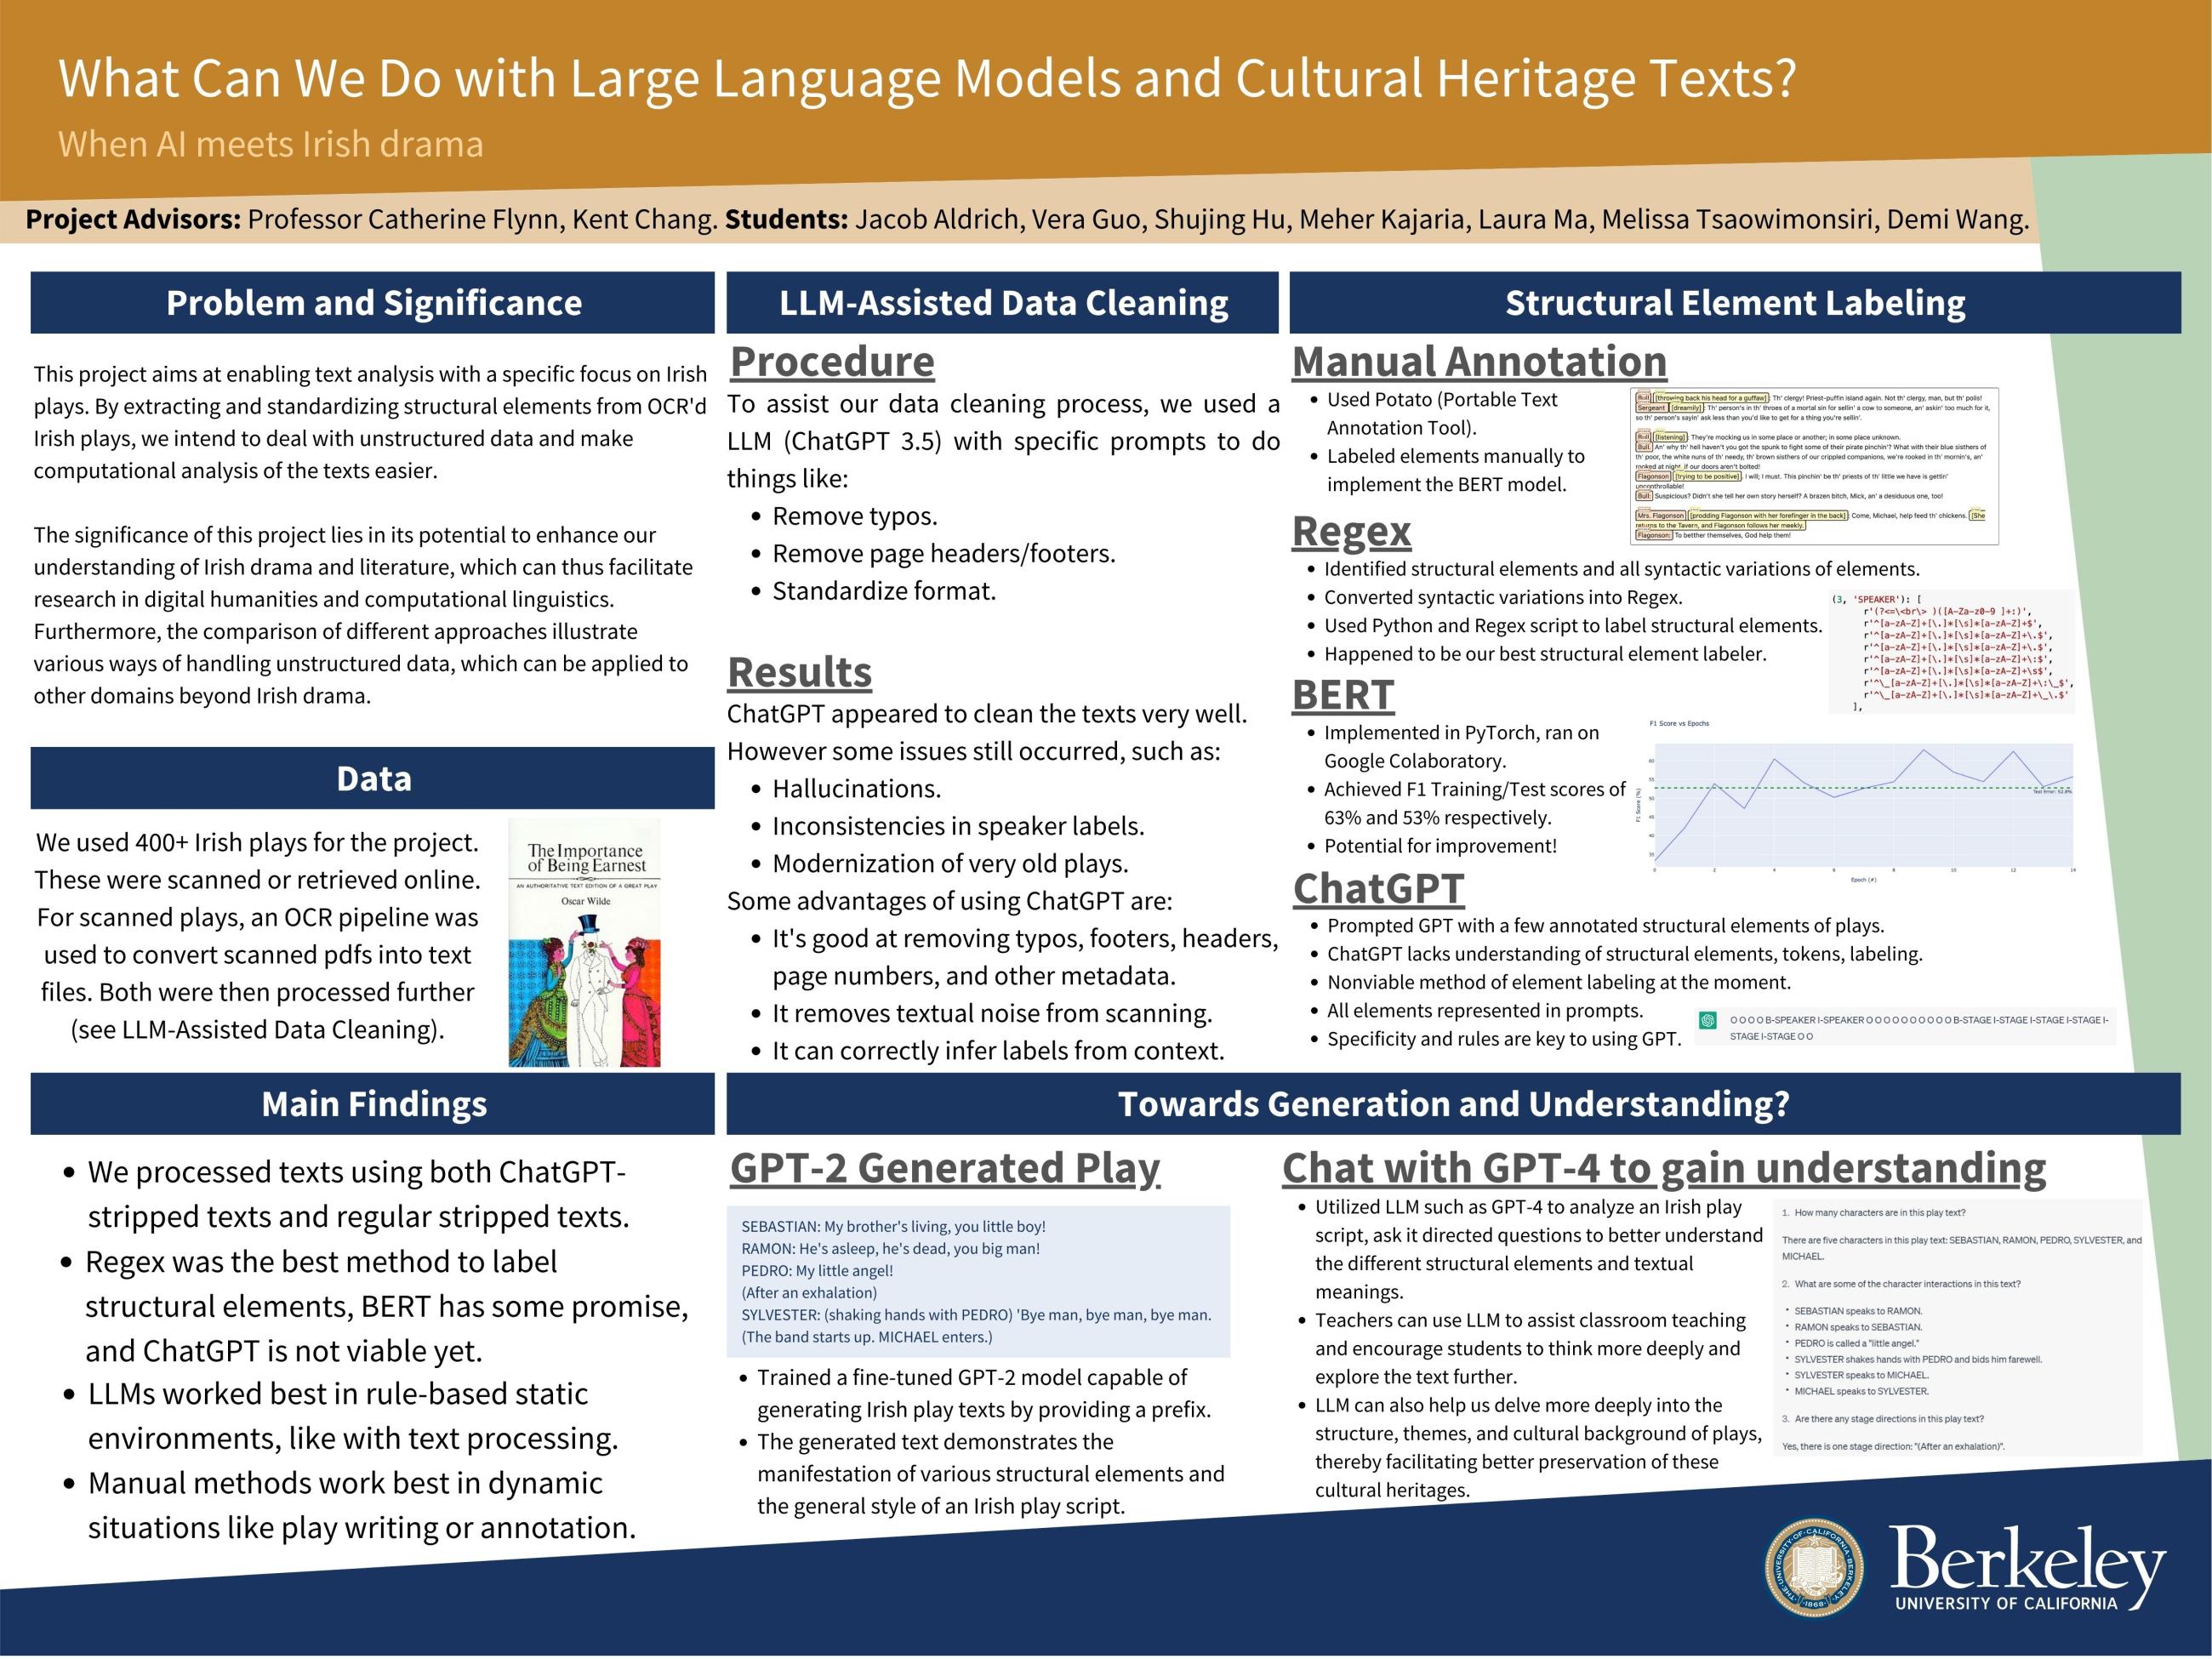 Large Language Models and Cultural Heritage Texts - Spring 2023 Discovery Project